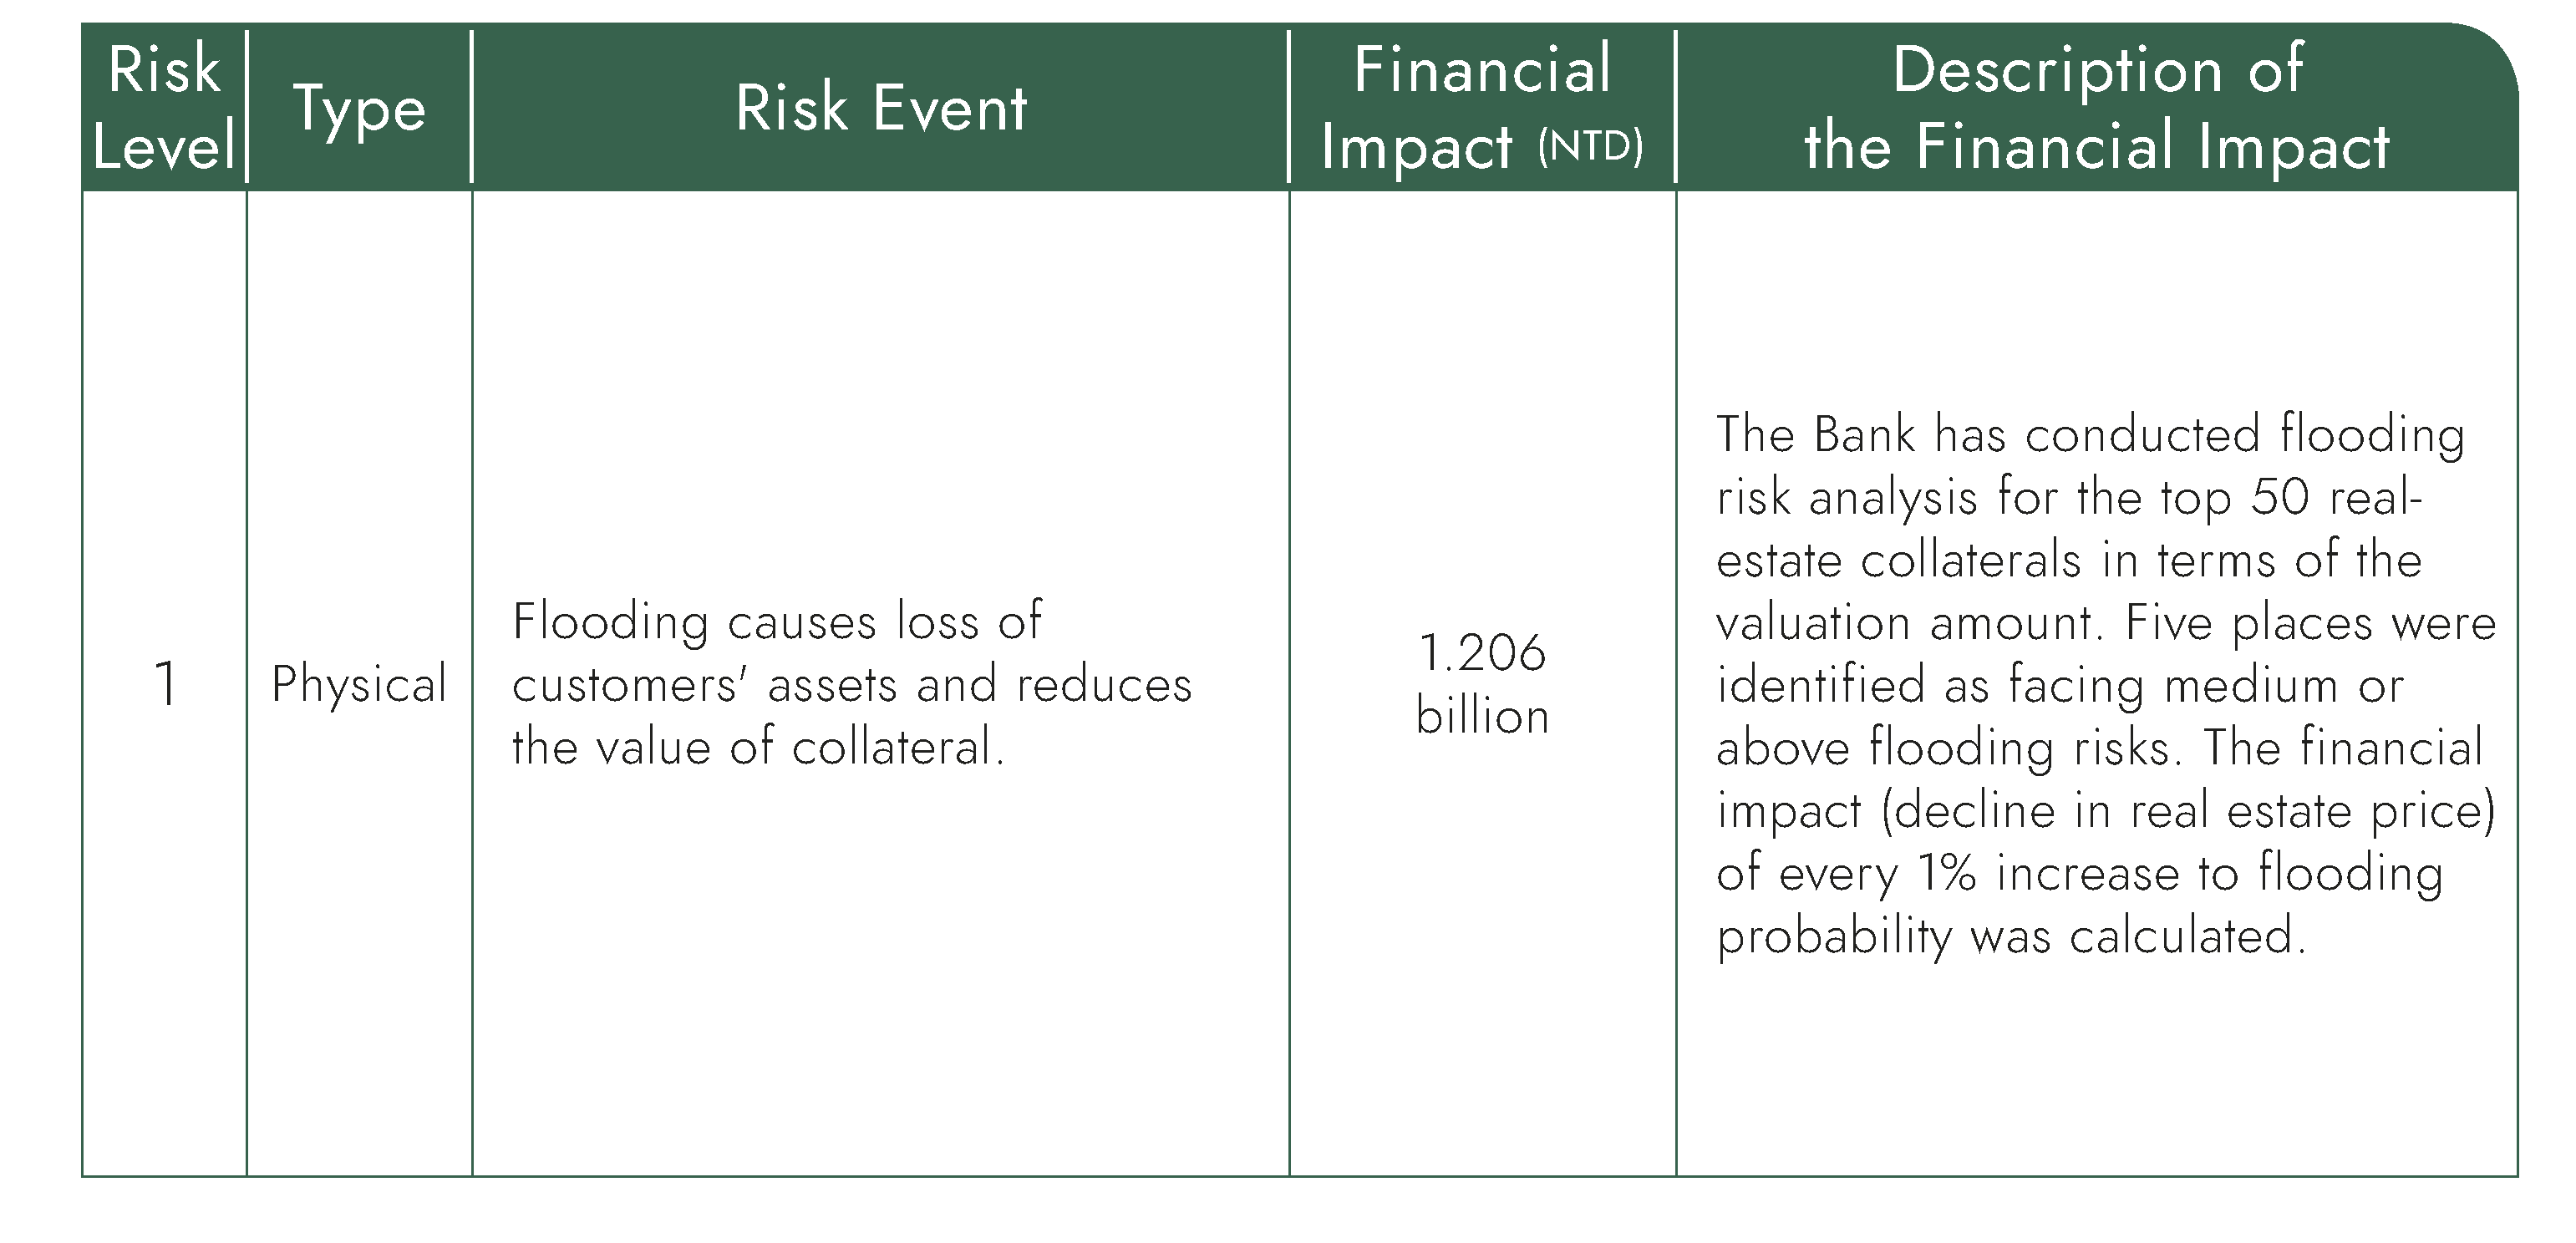 The Financial Impacts of the Climate Risks